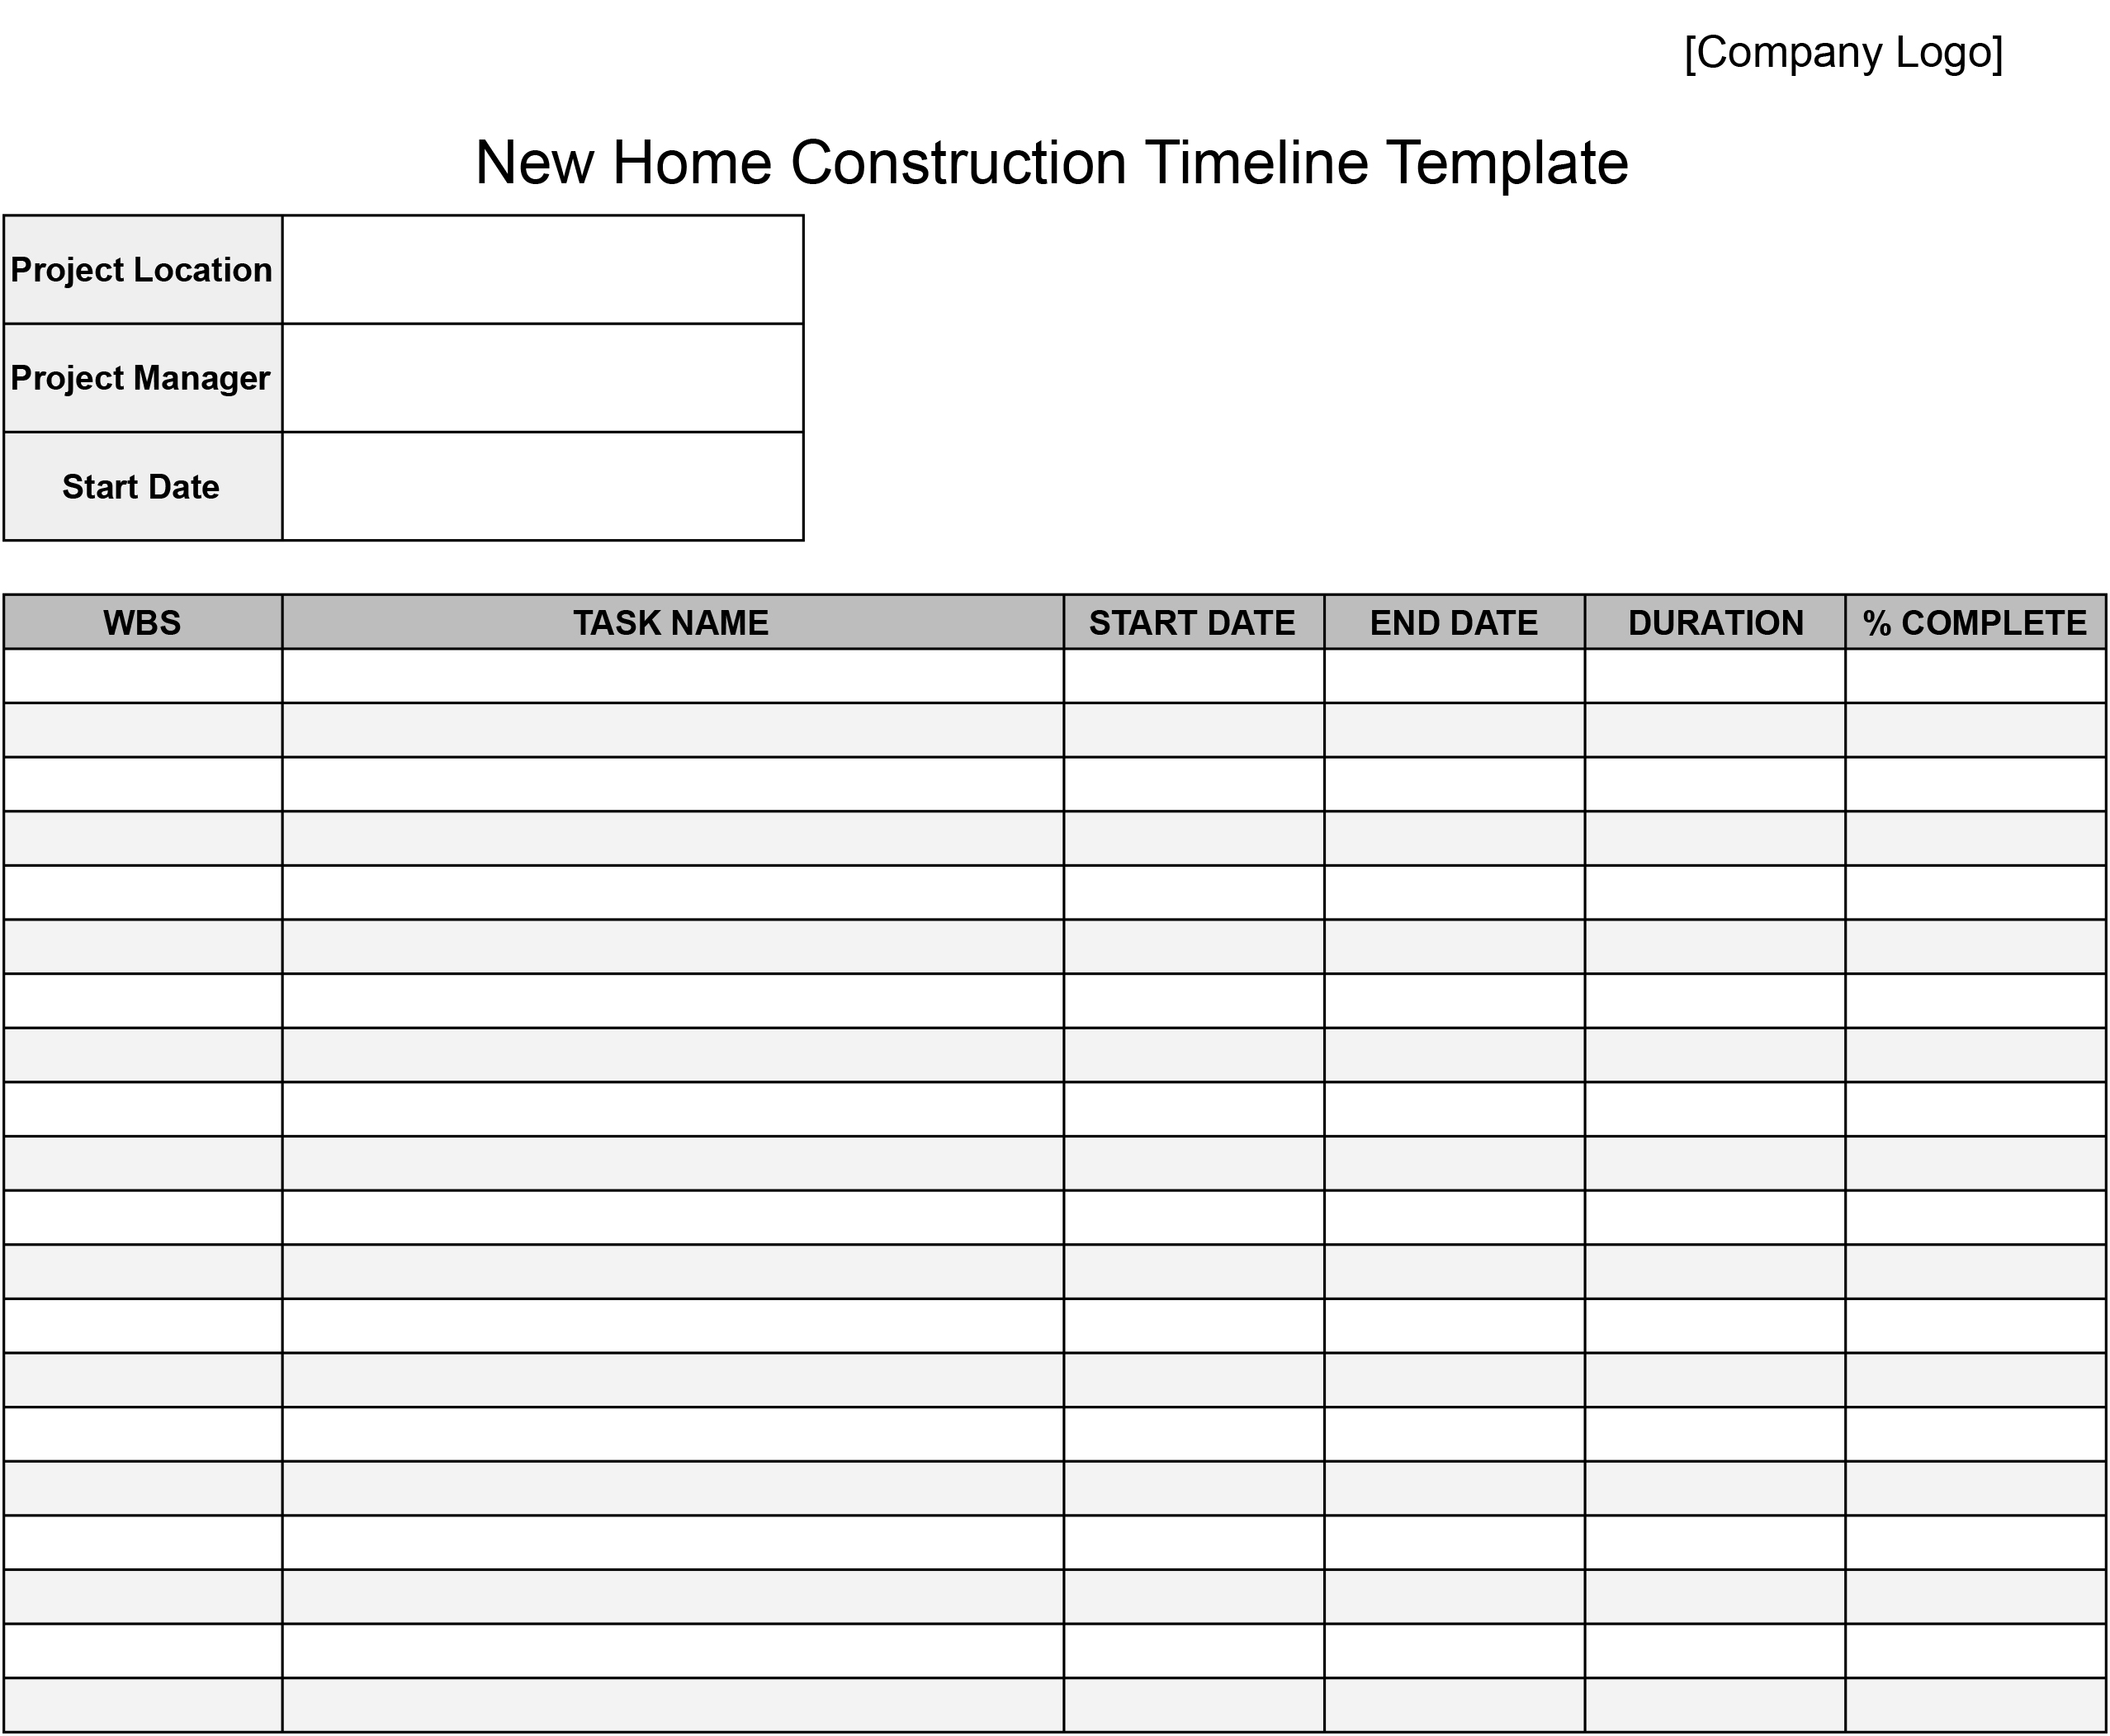 New Home Construction Timeline Template